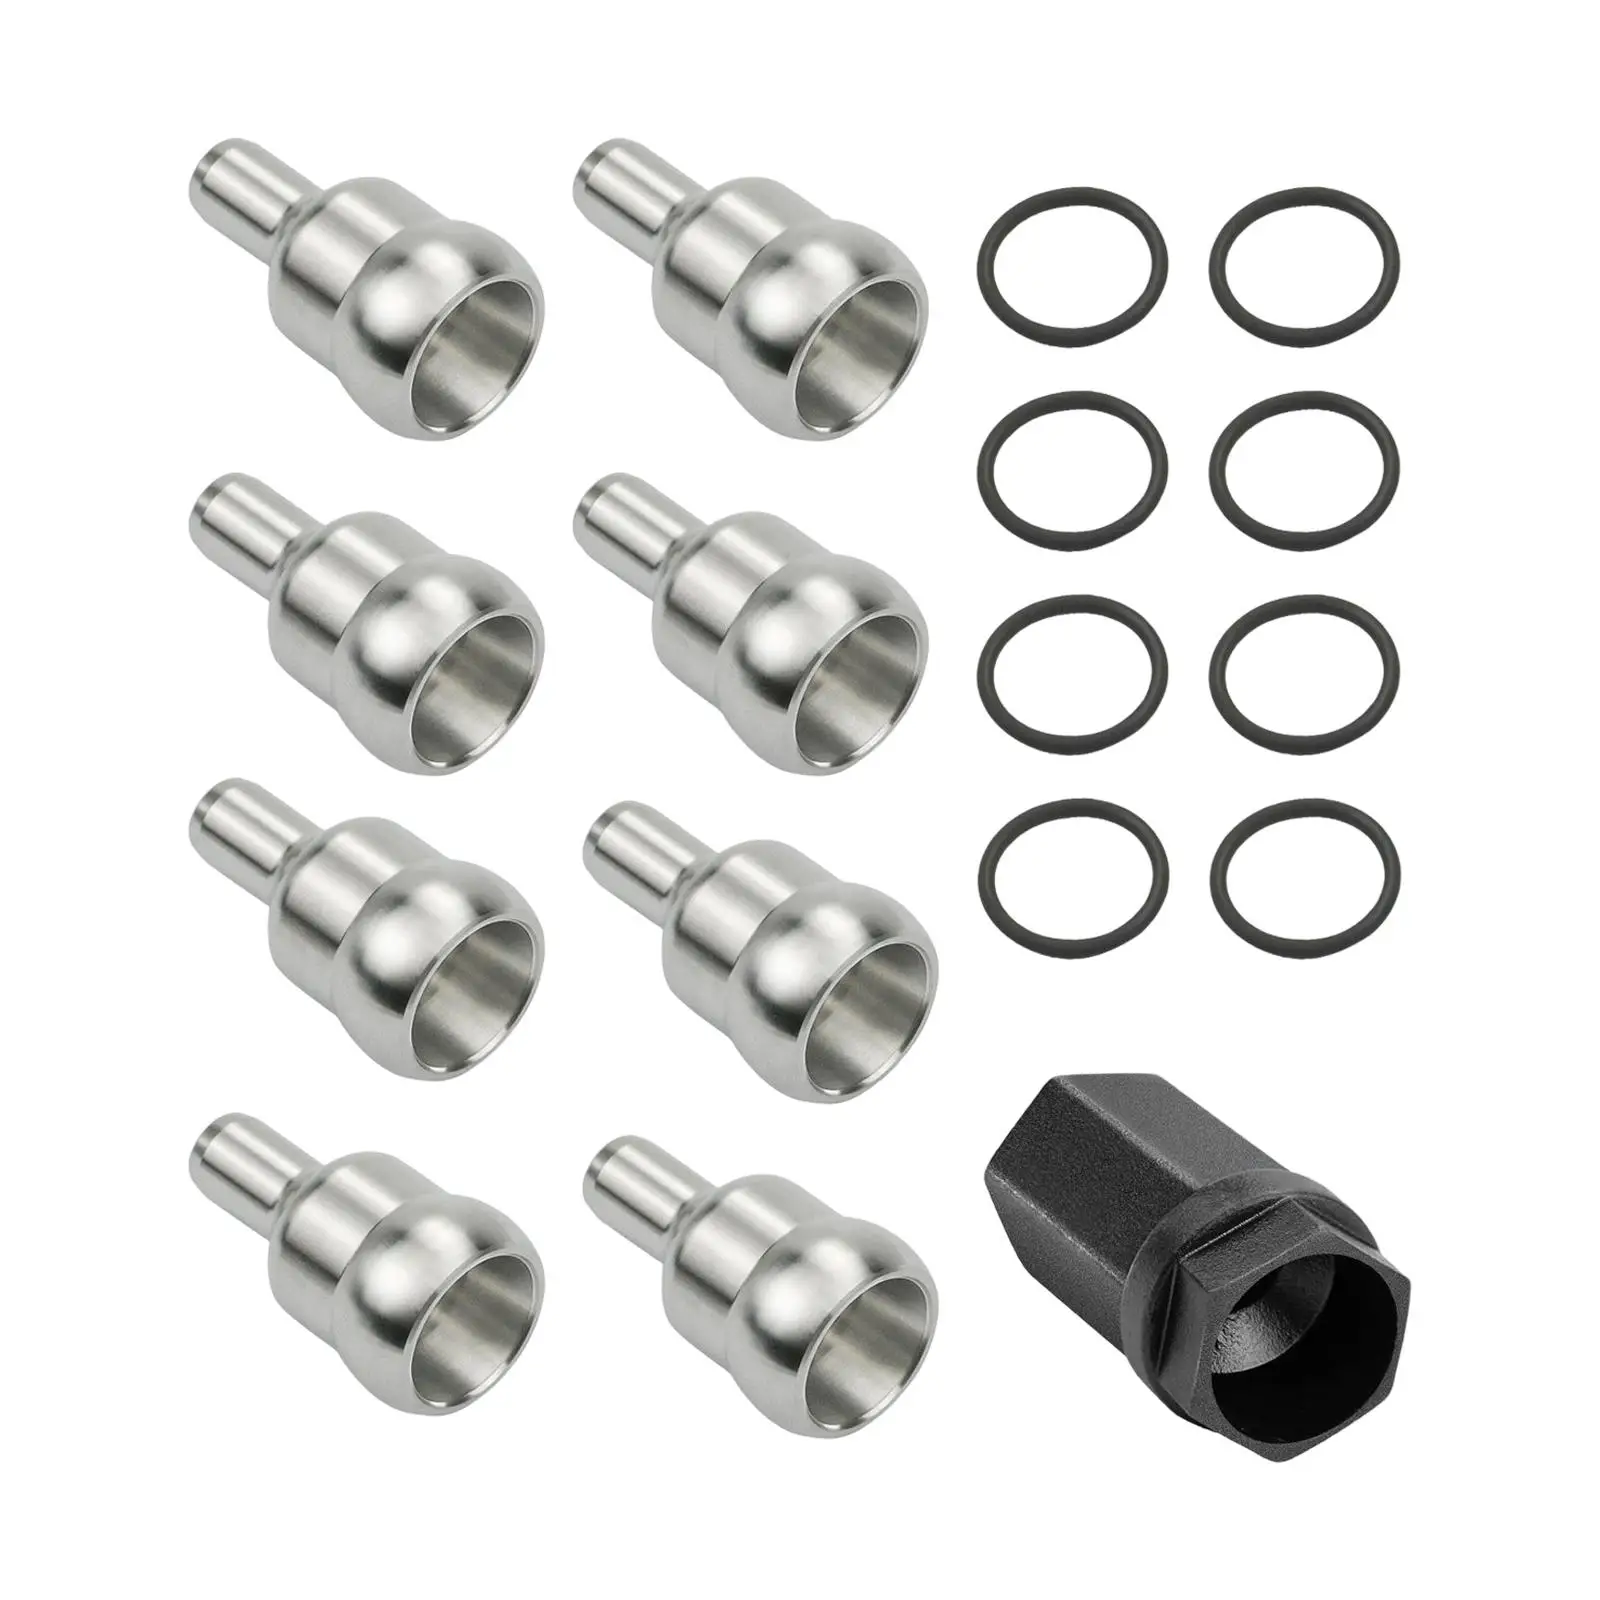 Nipple Cup Kit, 8x Nipples 8x Seals Fit for Ford 6.0L Accessories Durable